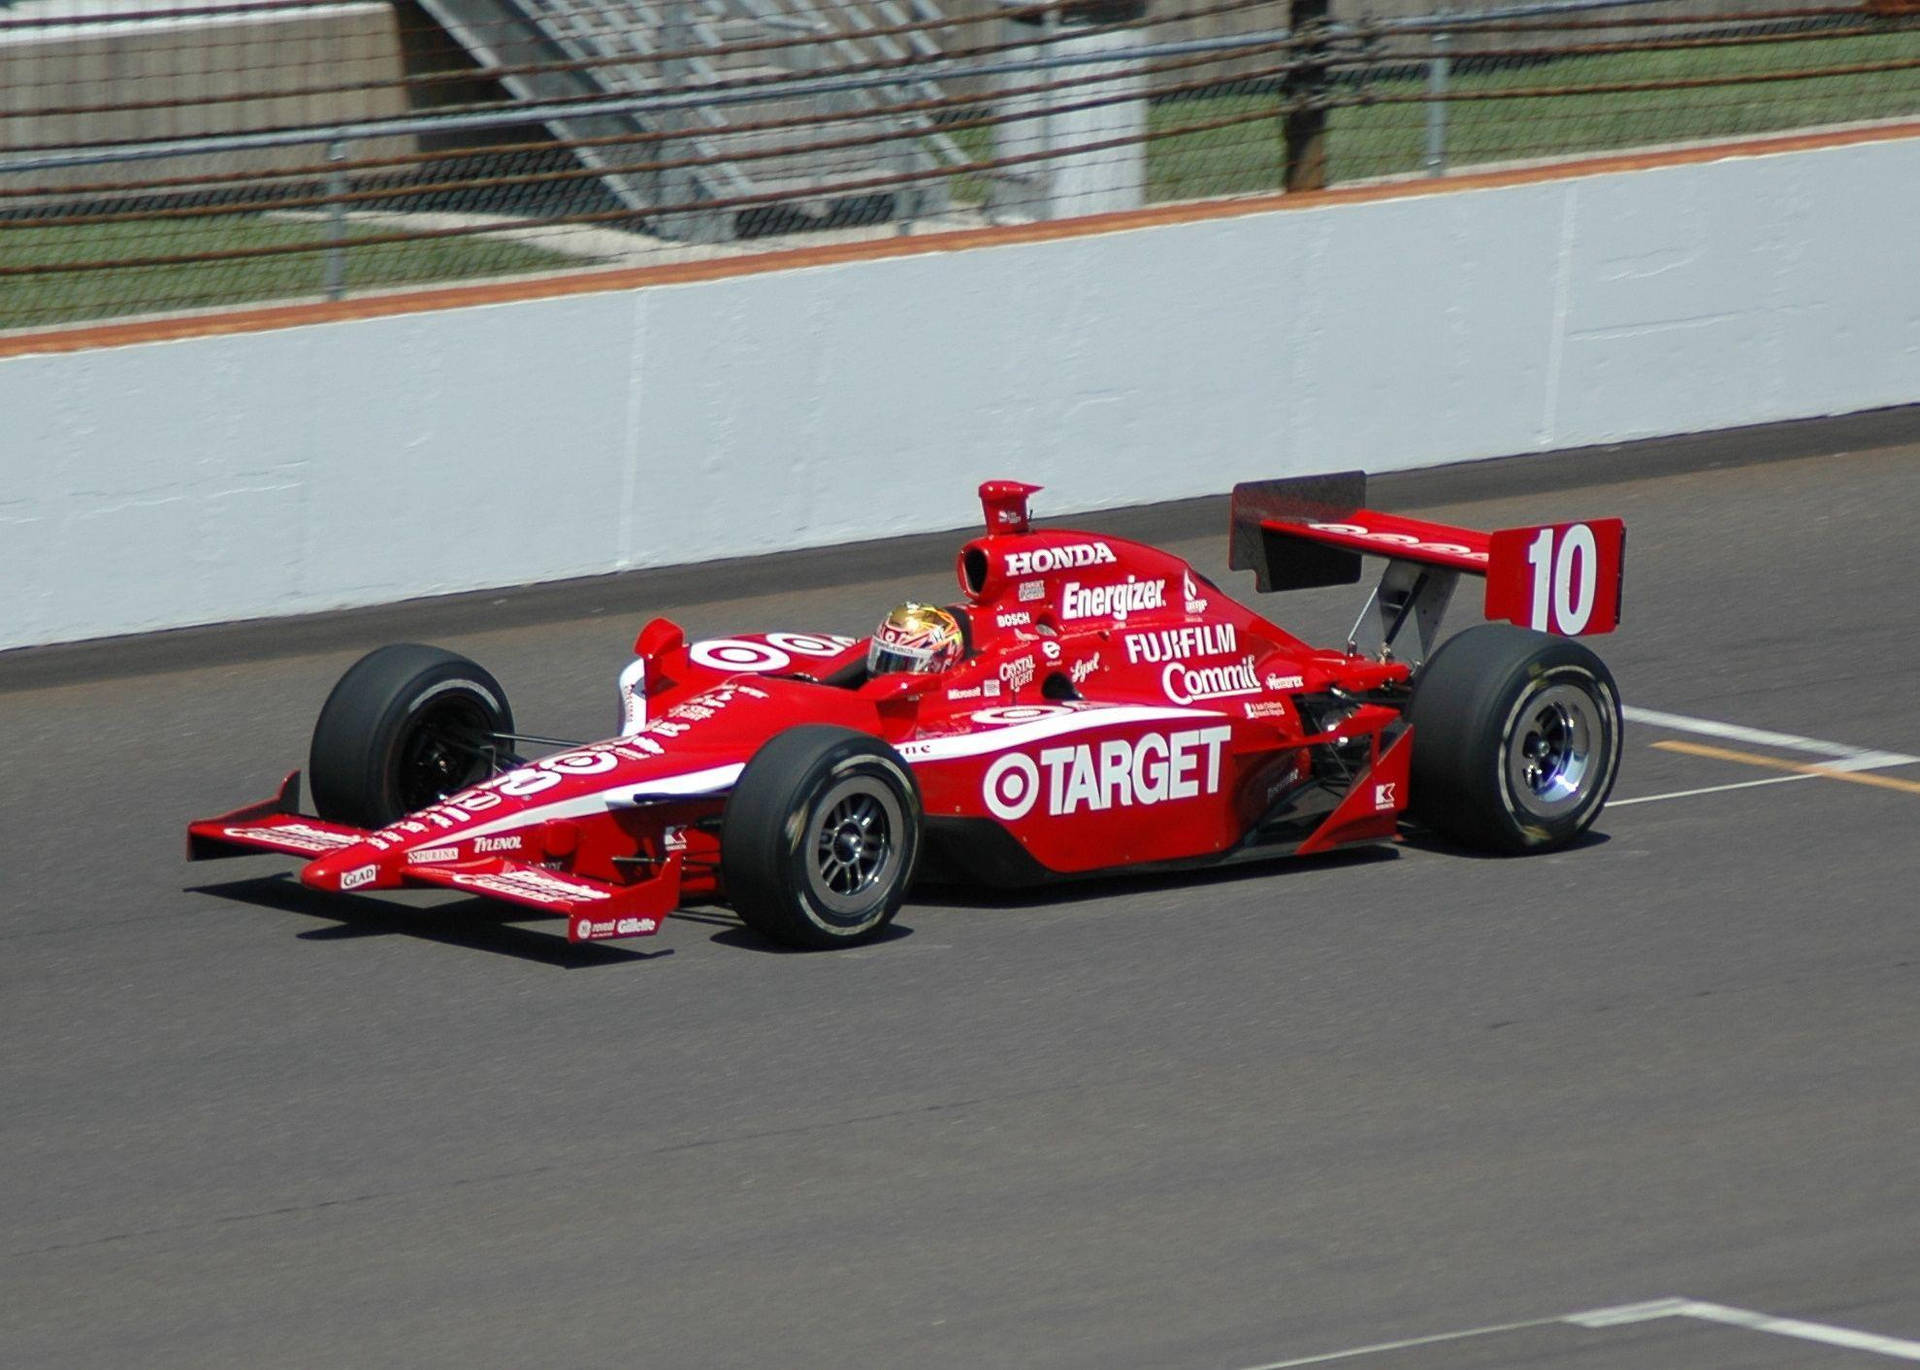 Red Indianapolis 500 Racing Car Background